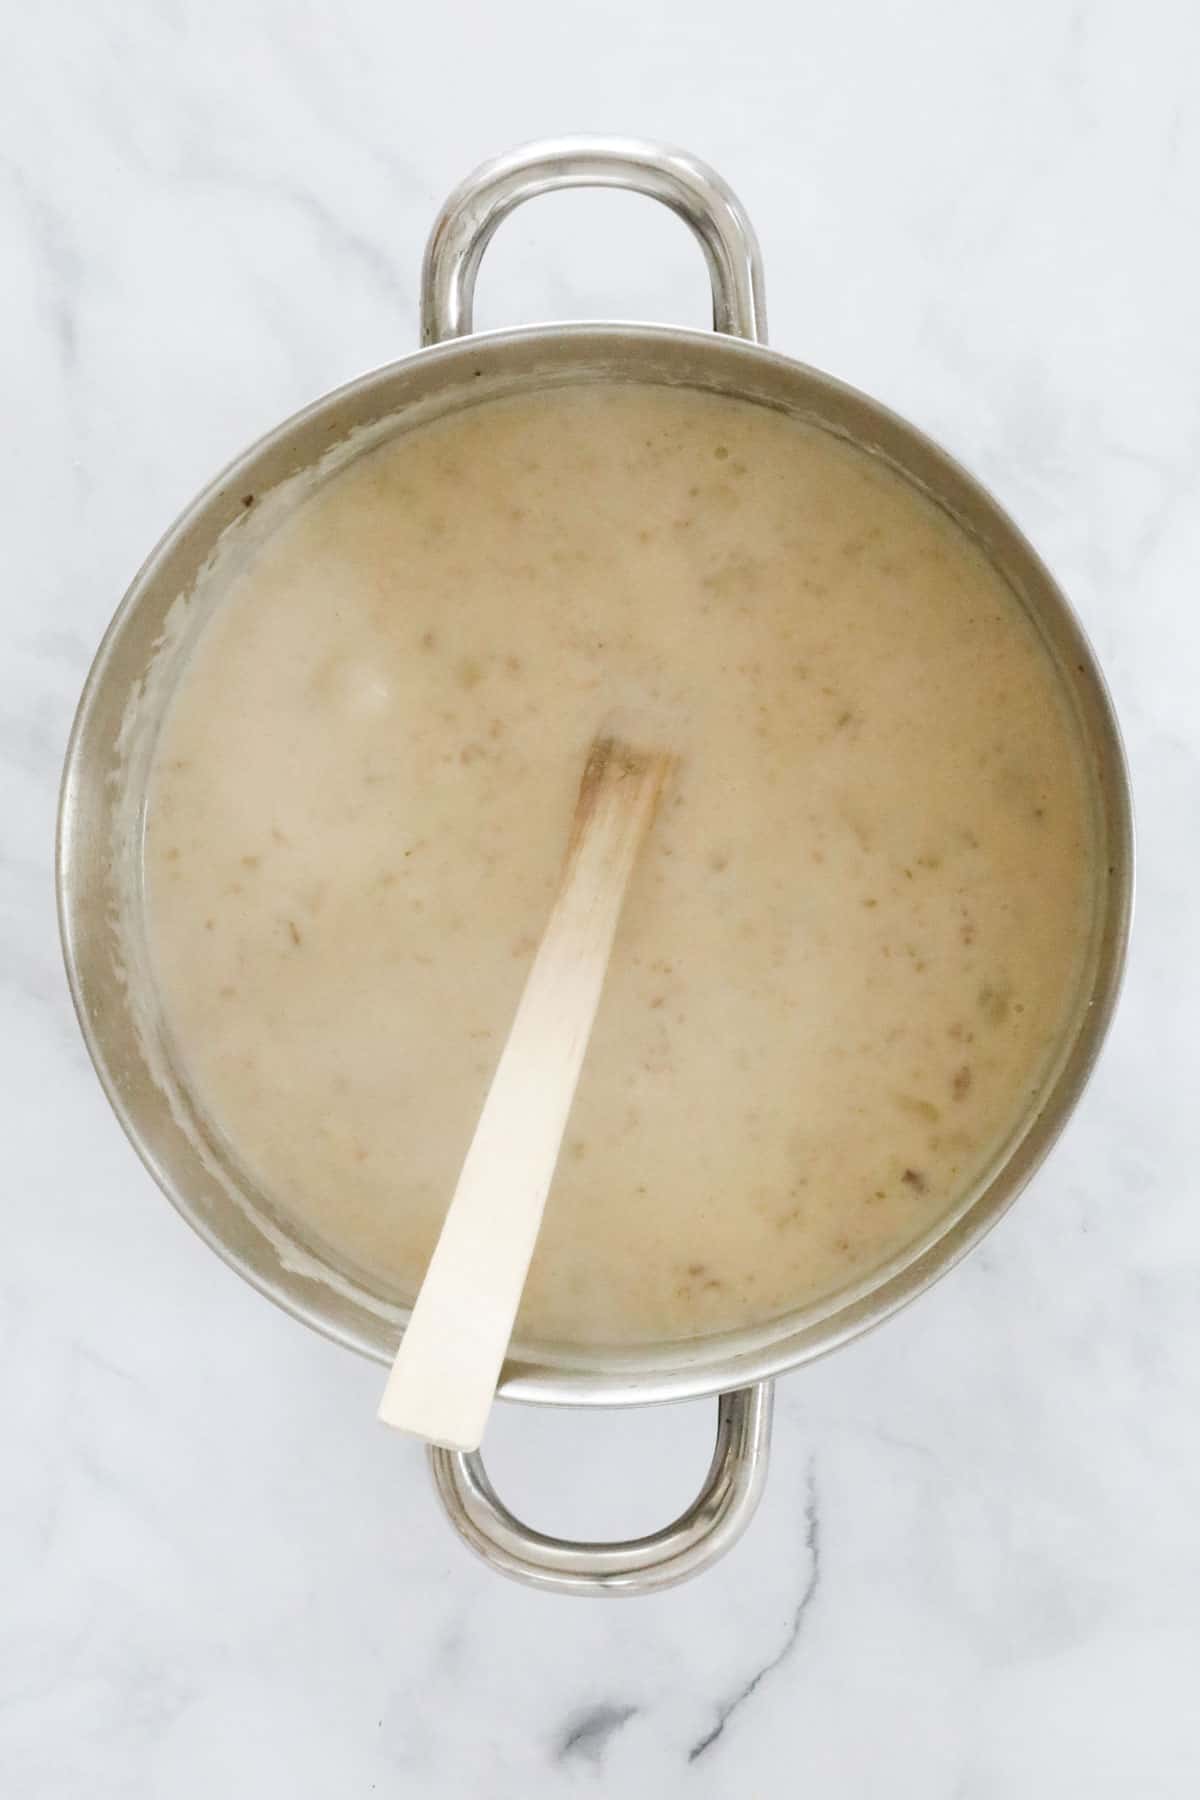 Thick creamy soup base in a saucepan with a wooden spoon.